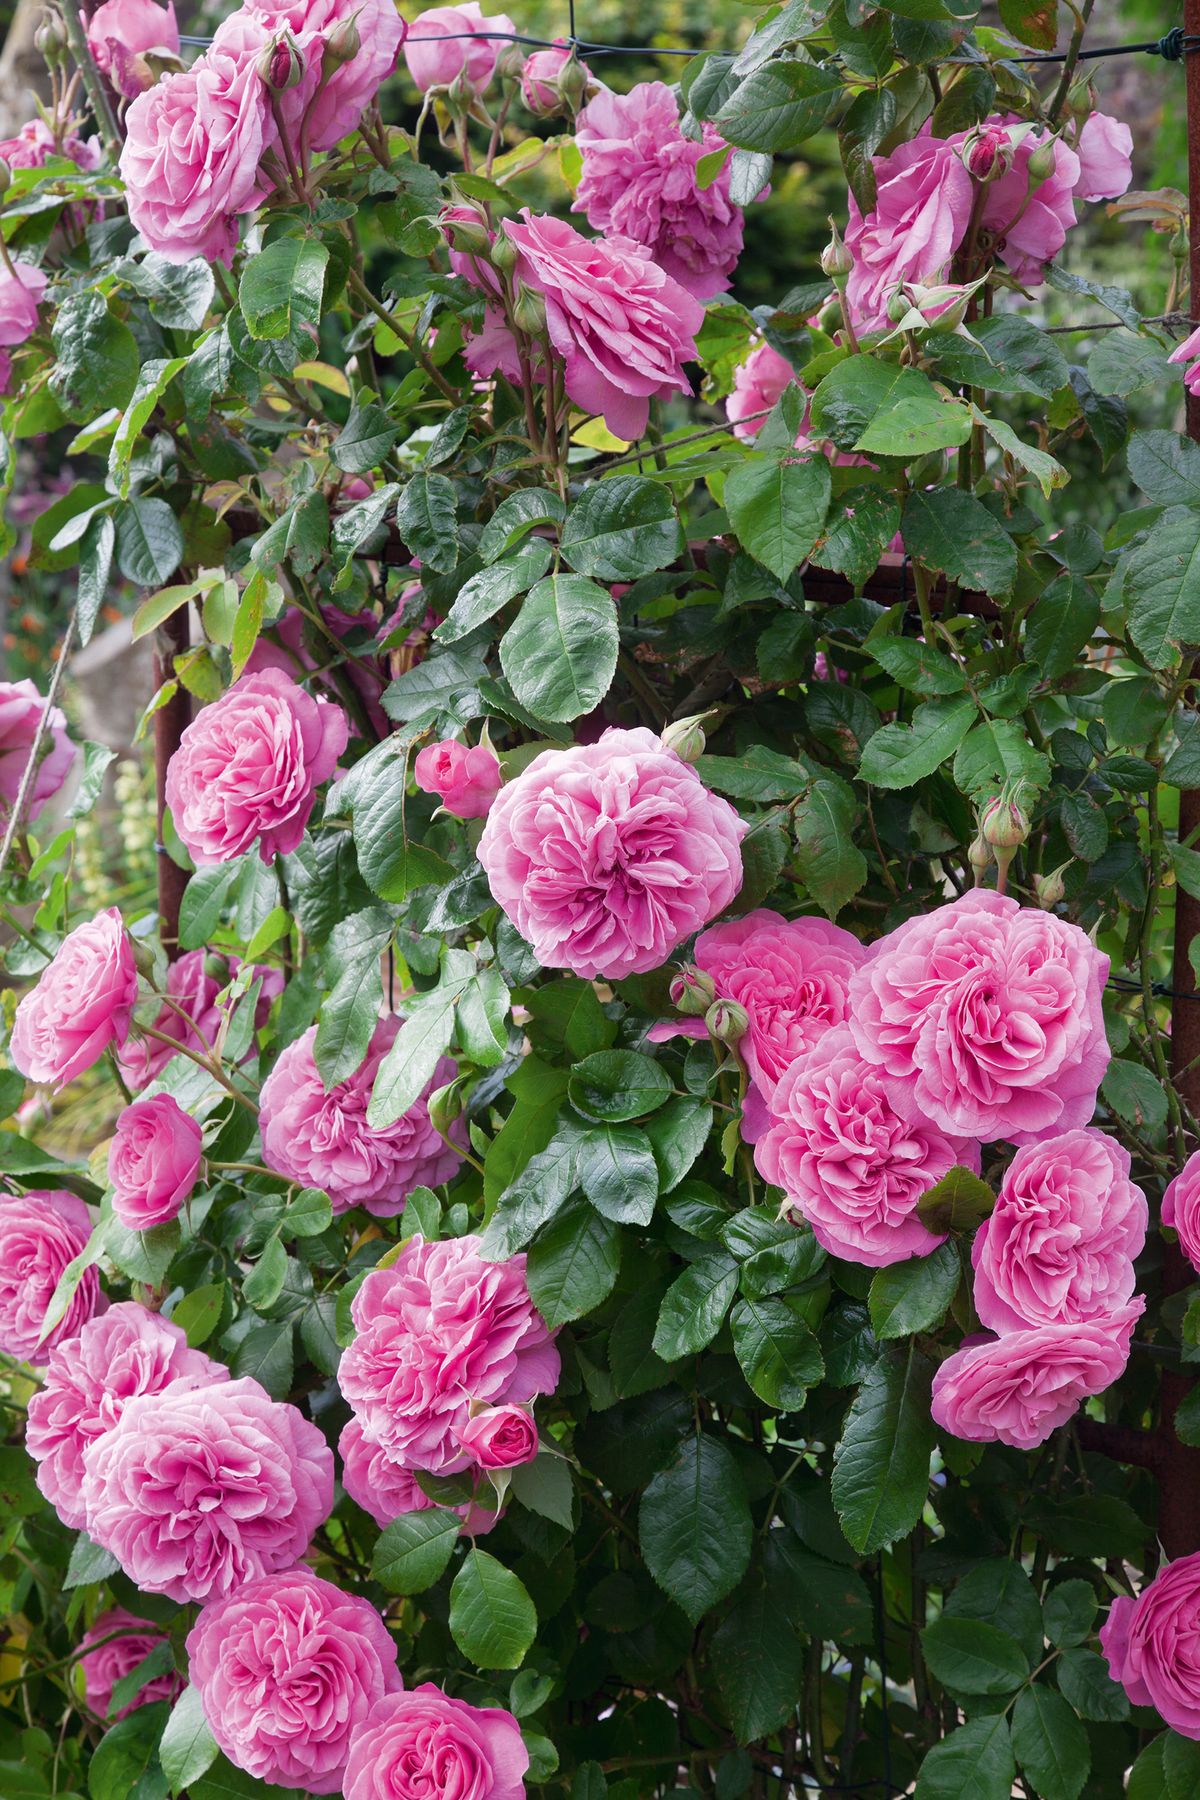 Mothers Day Rose 4LT Potted Hybrid Tea Garden Rose Bush MUM IN A MILLION Highly Fragrant Great Gift Pink